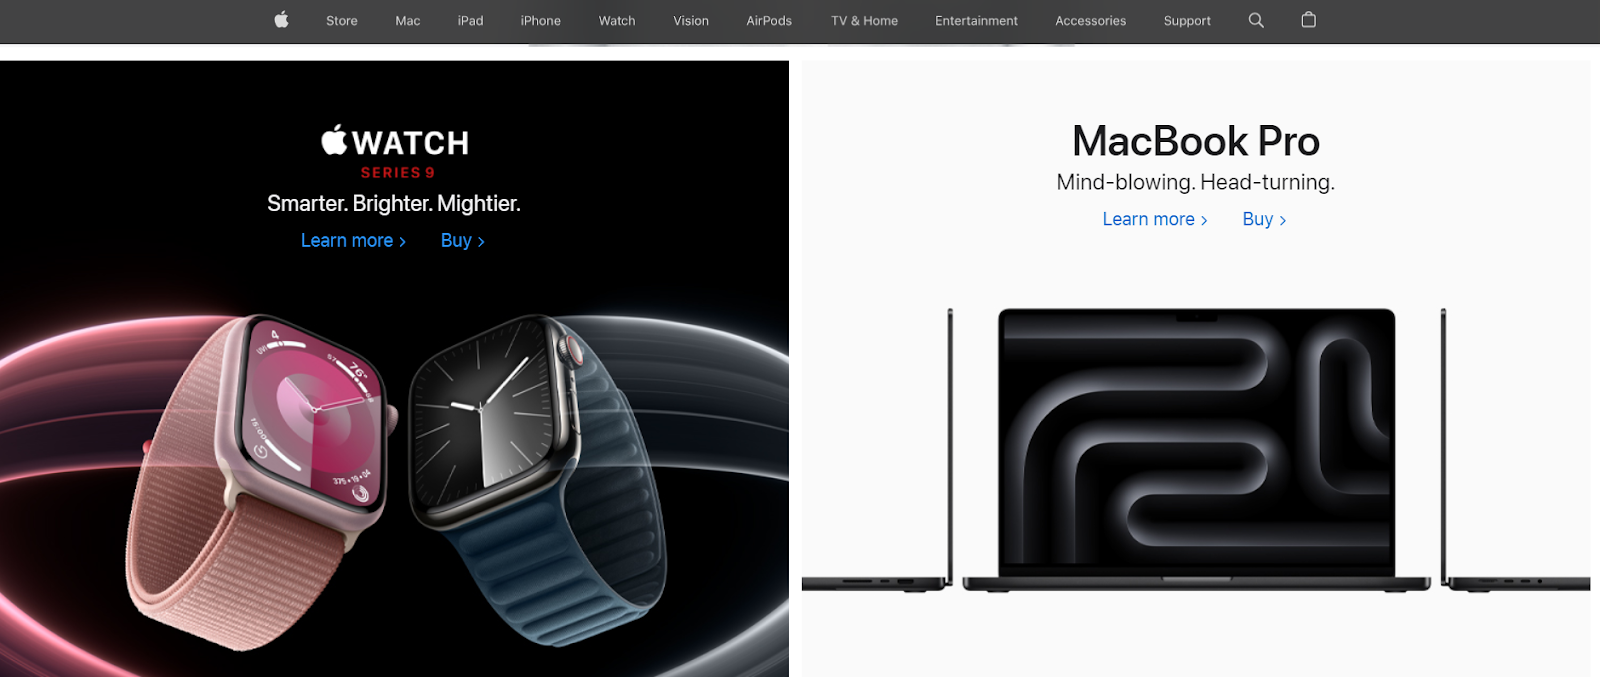 Apple as a brand with cohesive identity